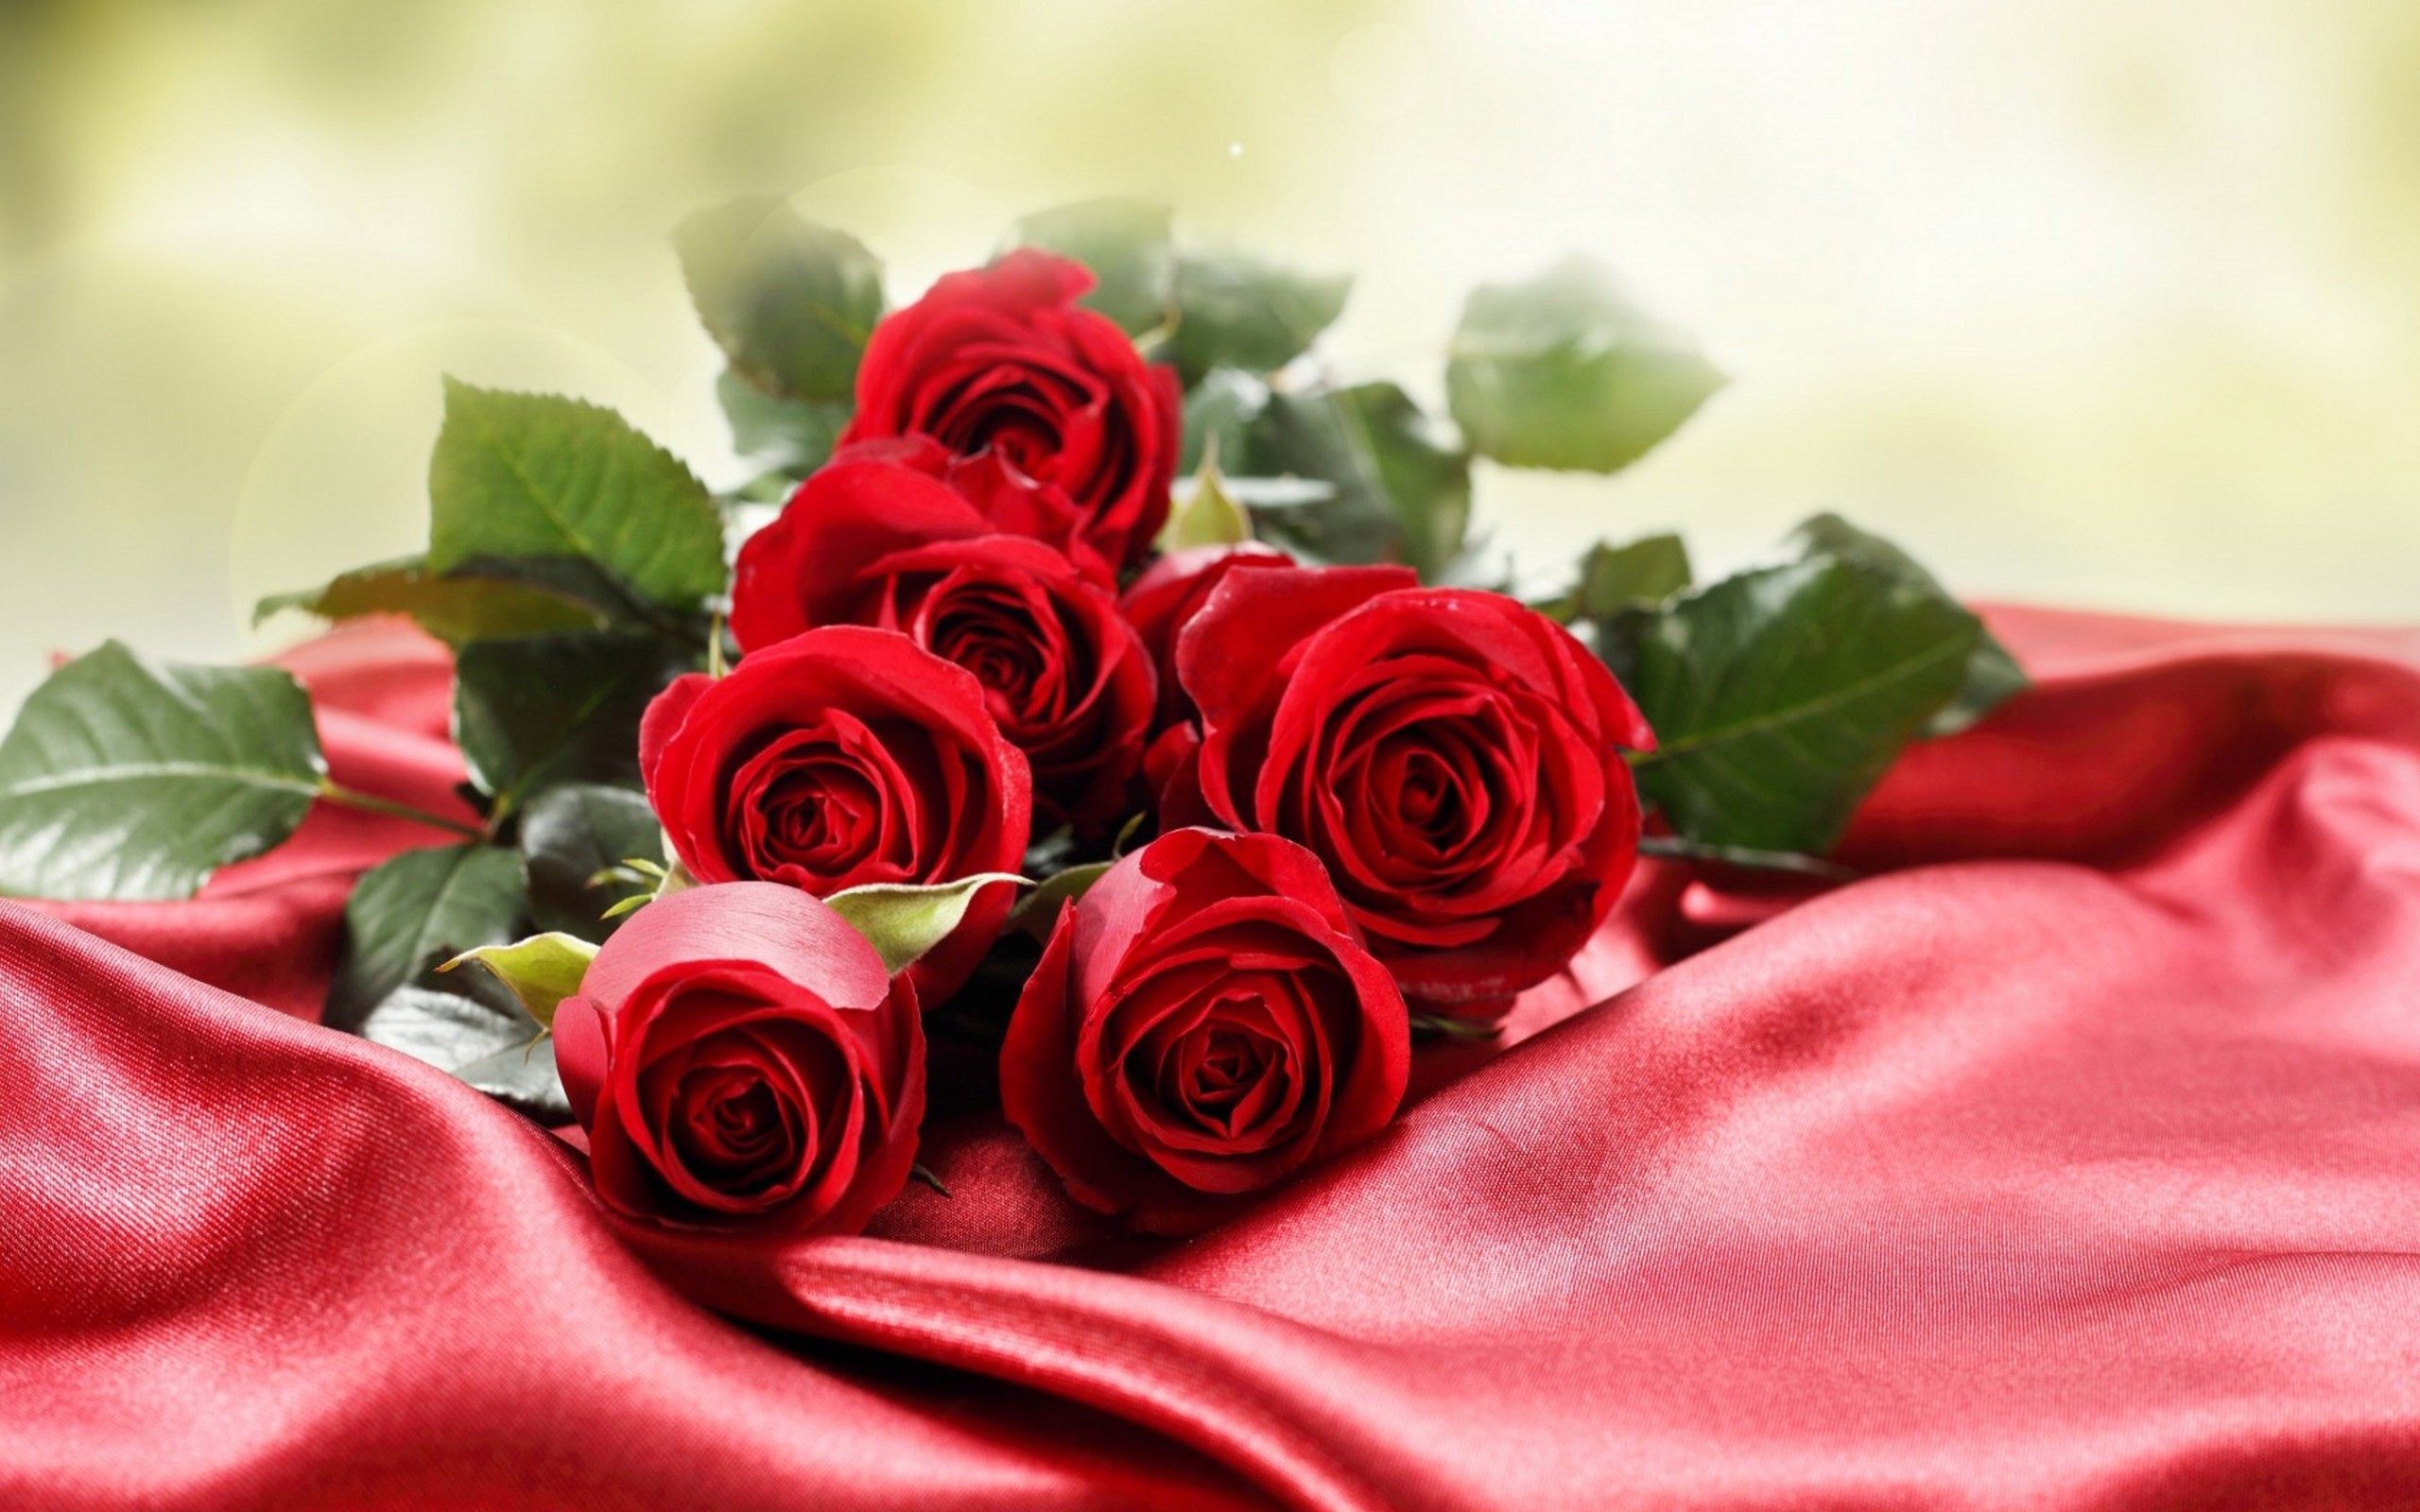 beautiful pictures of roses for wallpaper,flower,garden roses,red,rose,rose family